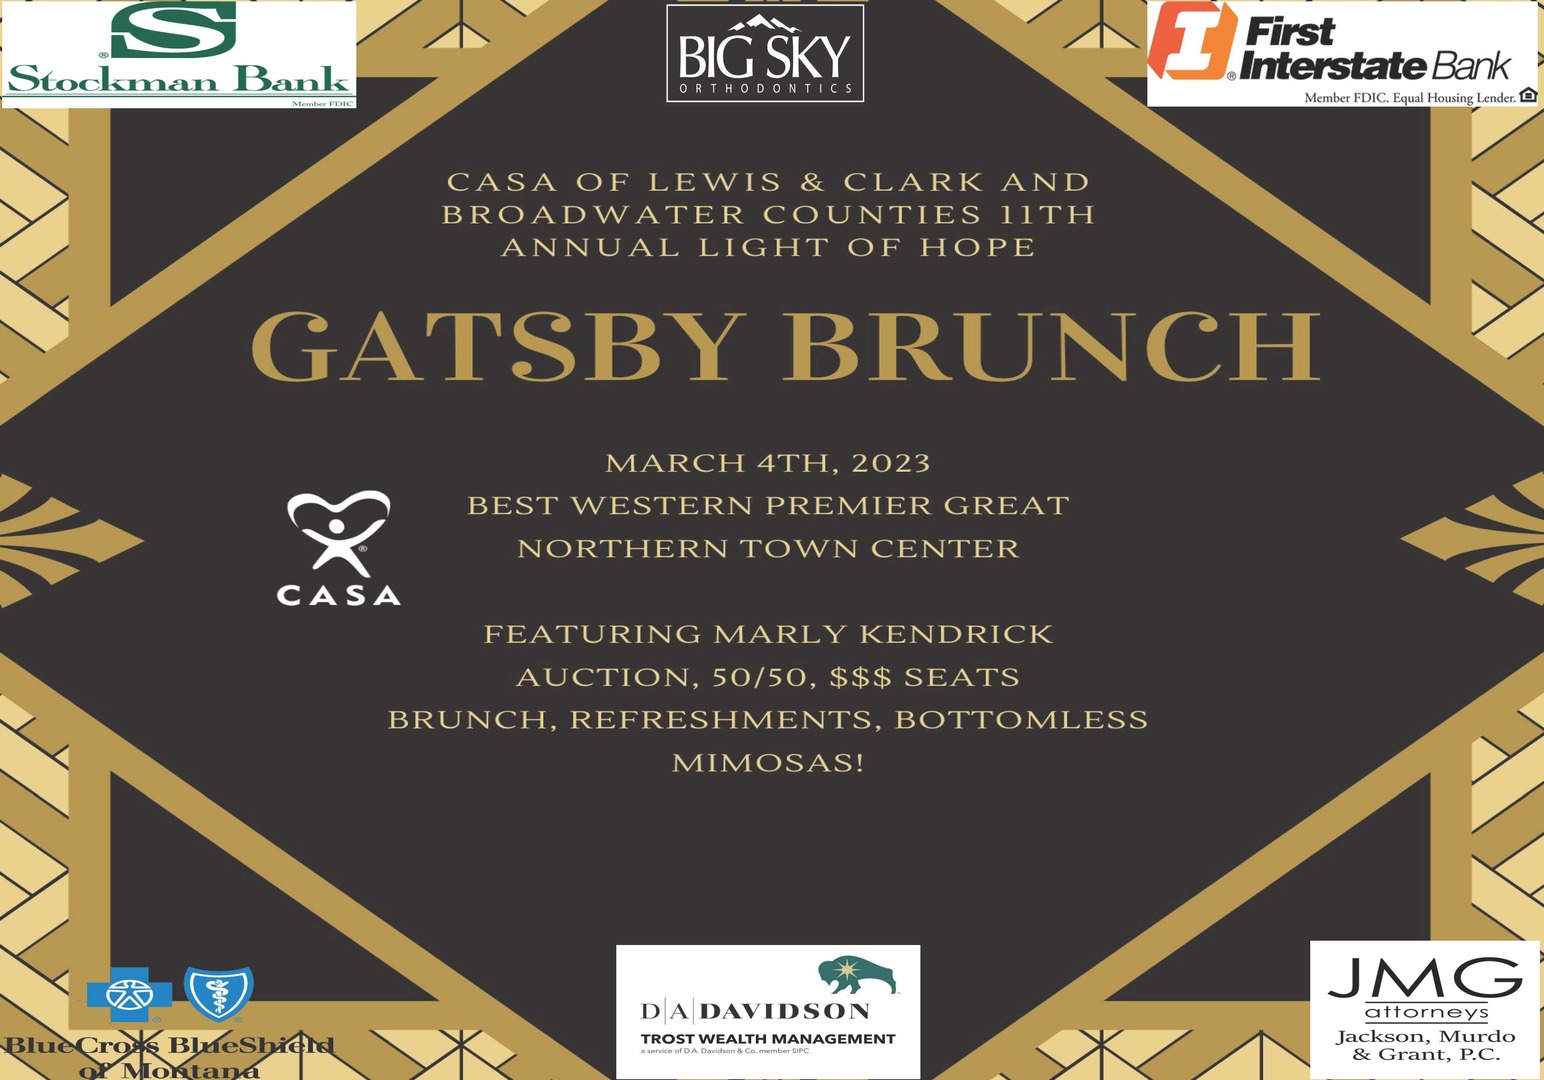 CASA's 11th Annual Light of Hope Gatsby Brunch, Helena, Montana, United States